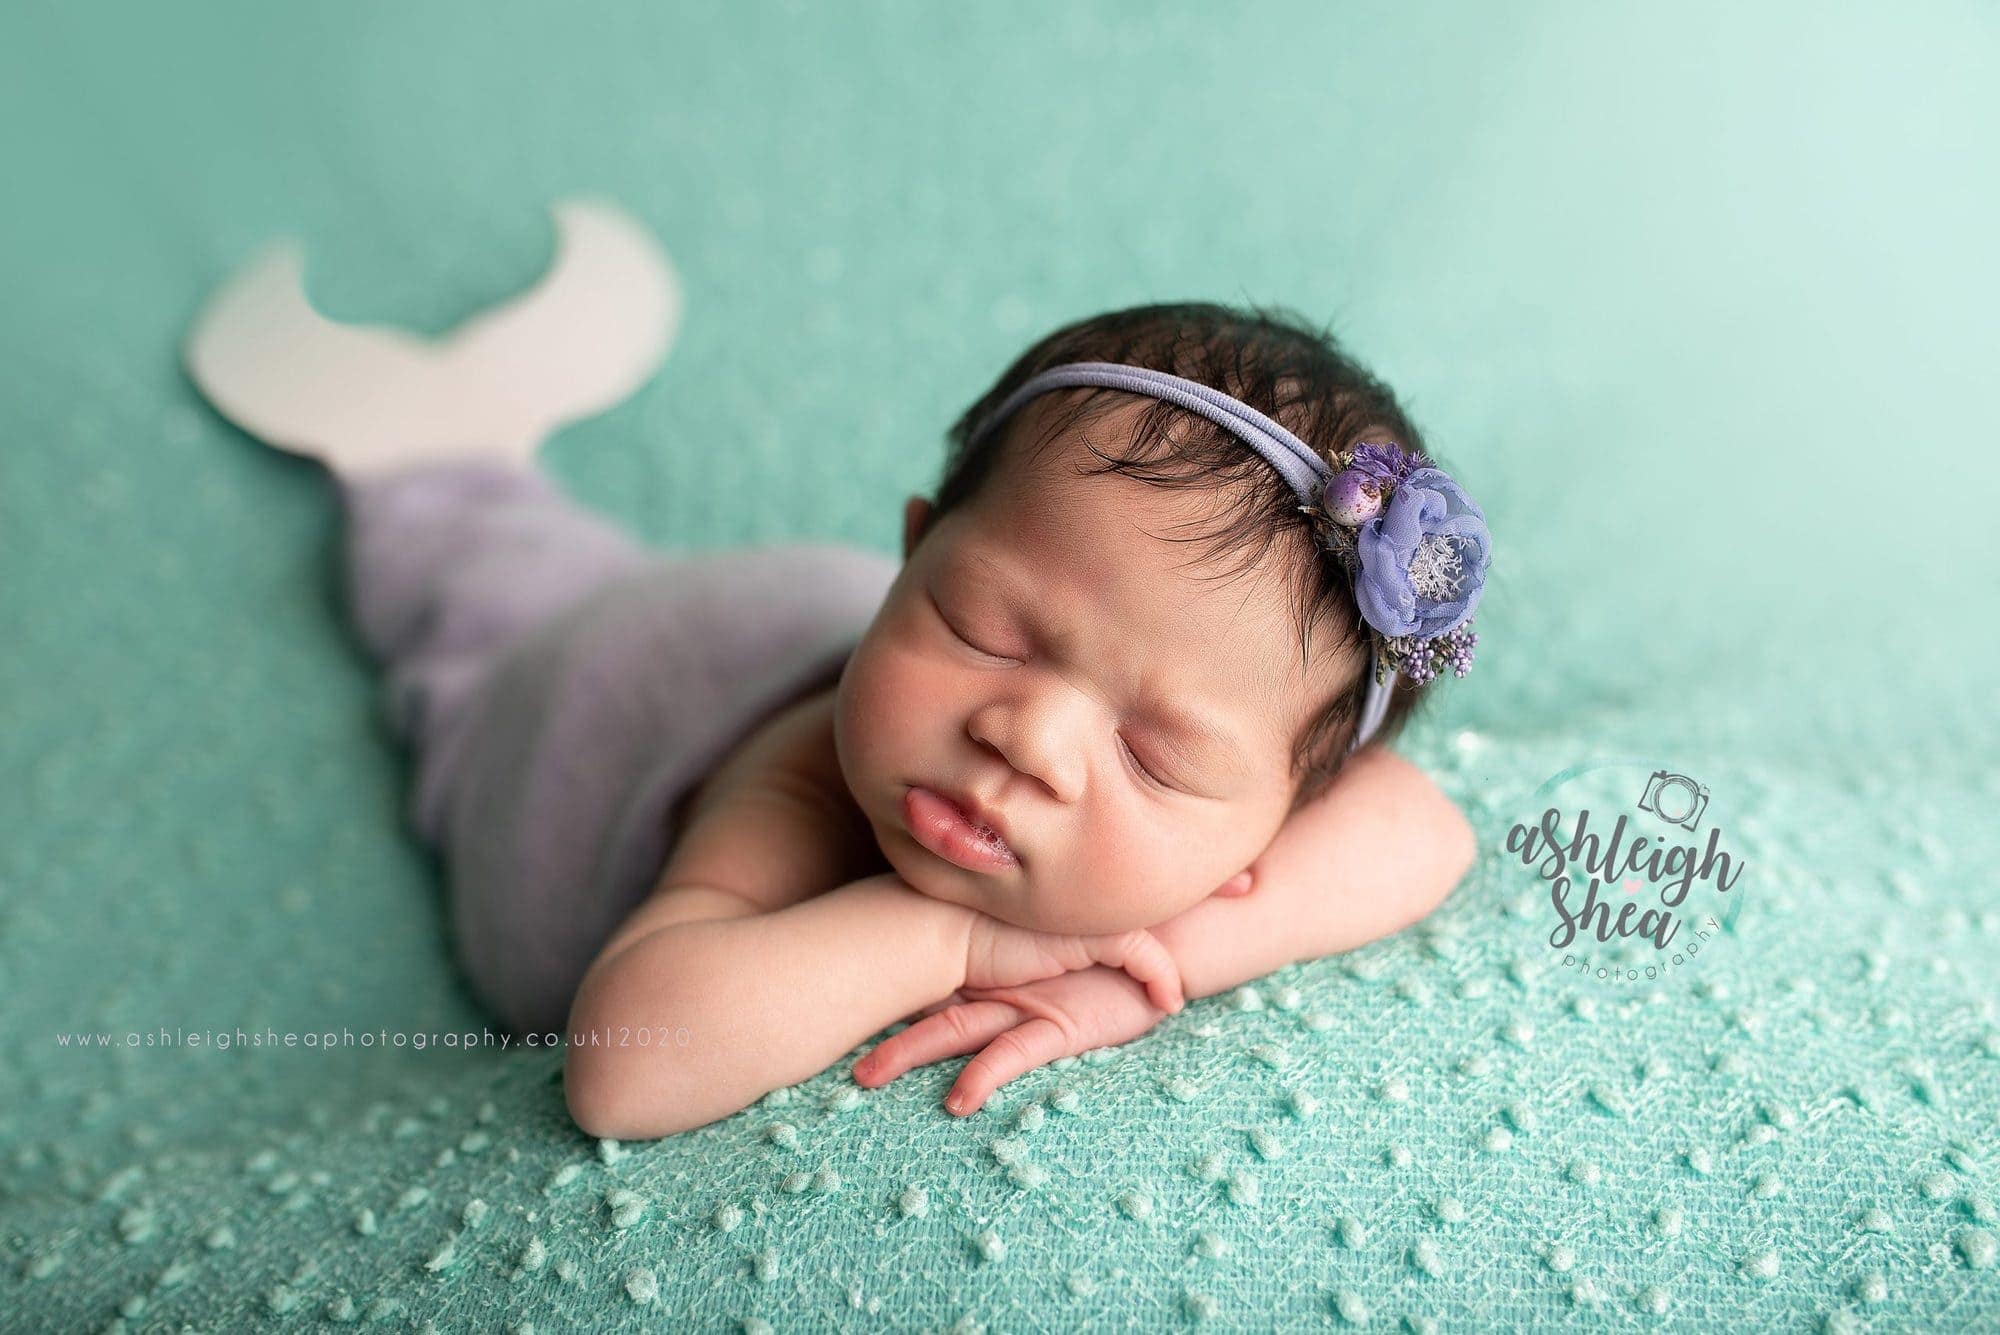 The Little Mermaid, Disney Inspired, Ivy and Nell, Ashleigh Shea Photography, Bromley, Kent, Newborn Photographer